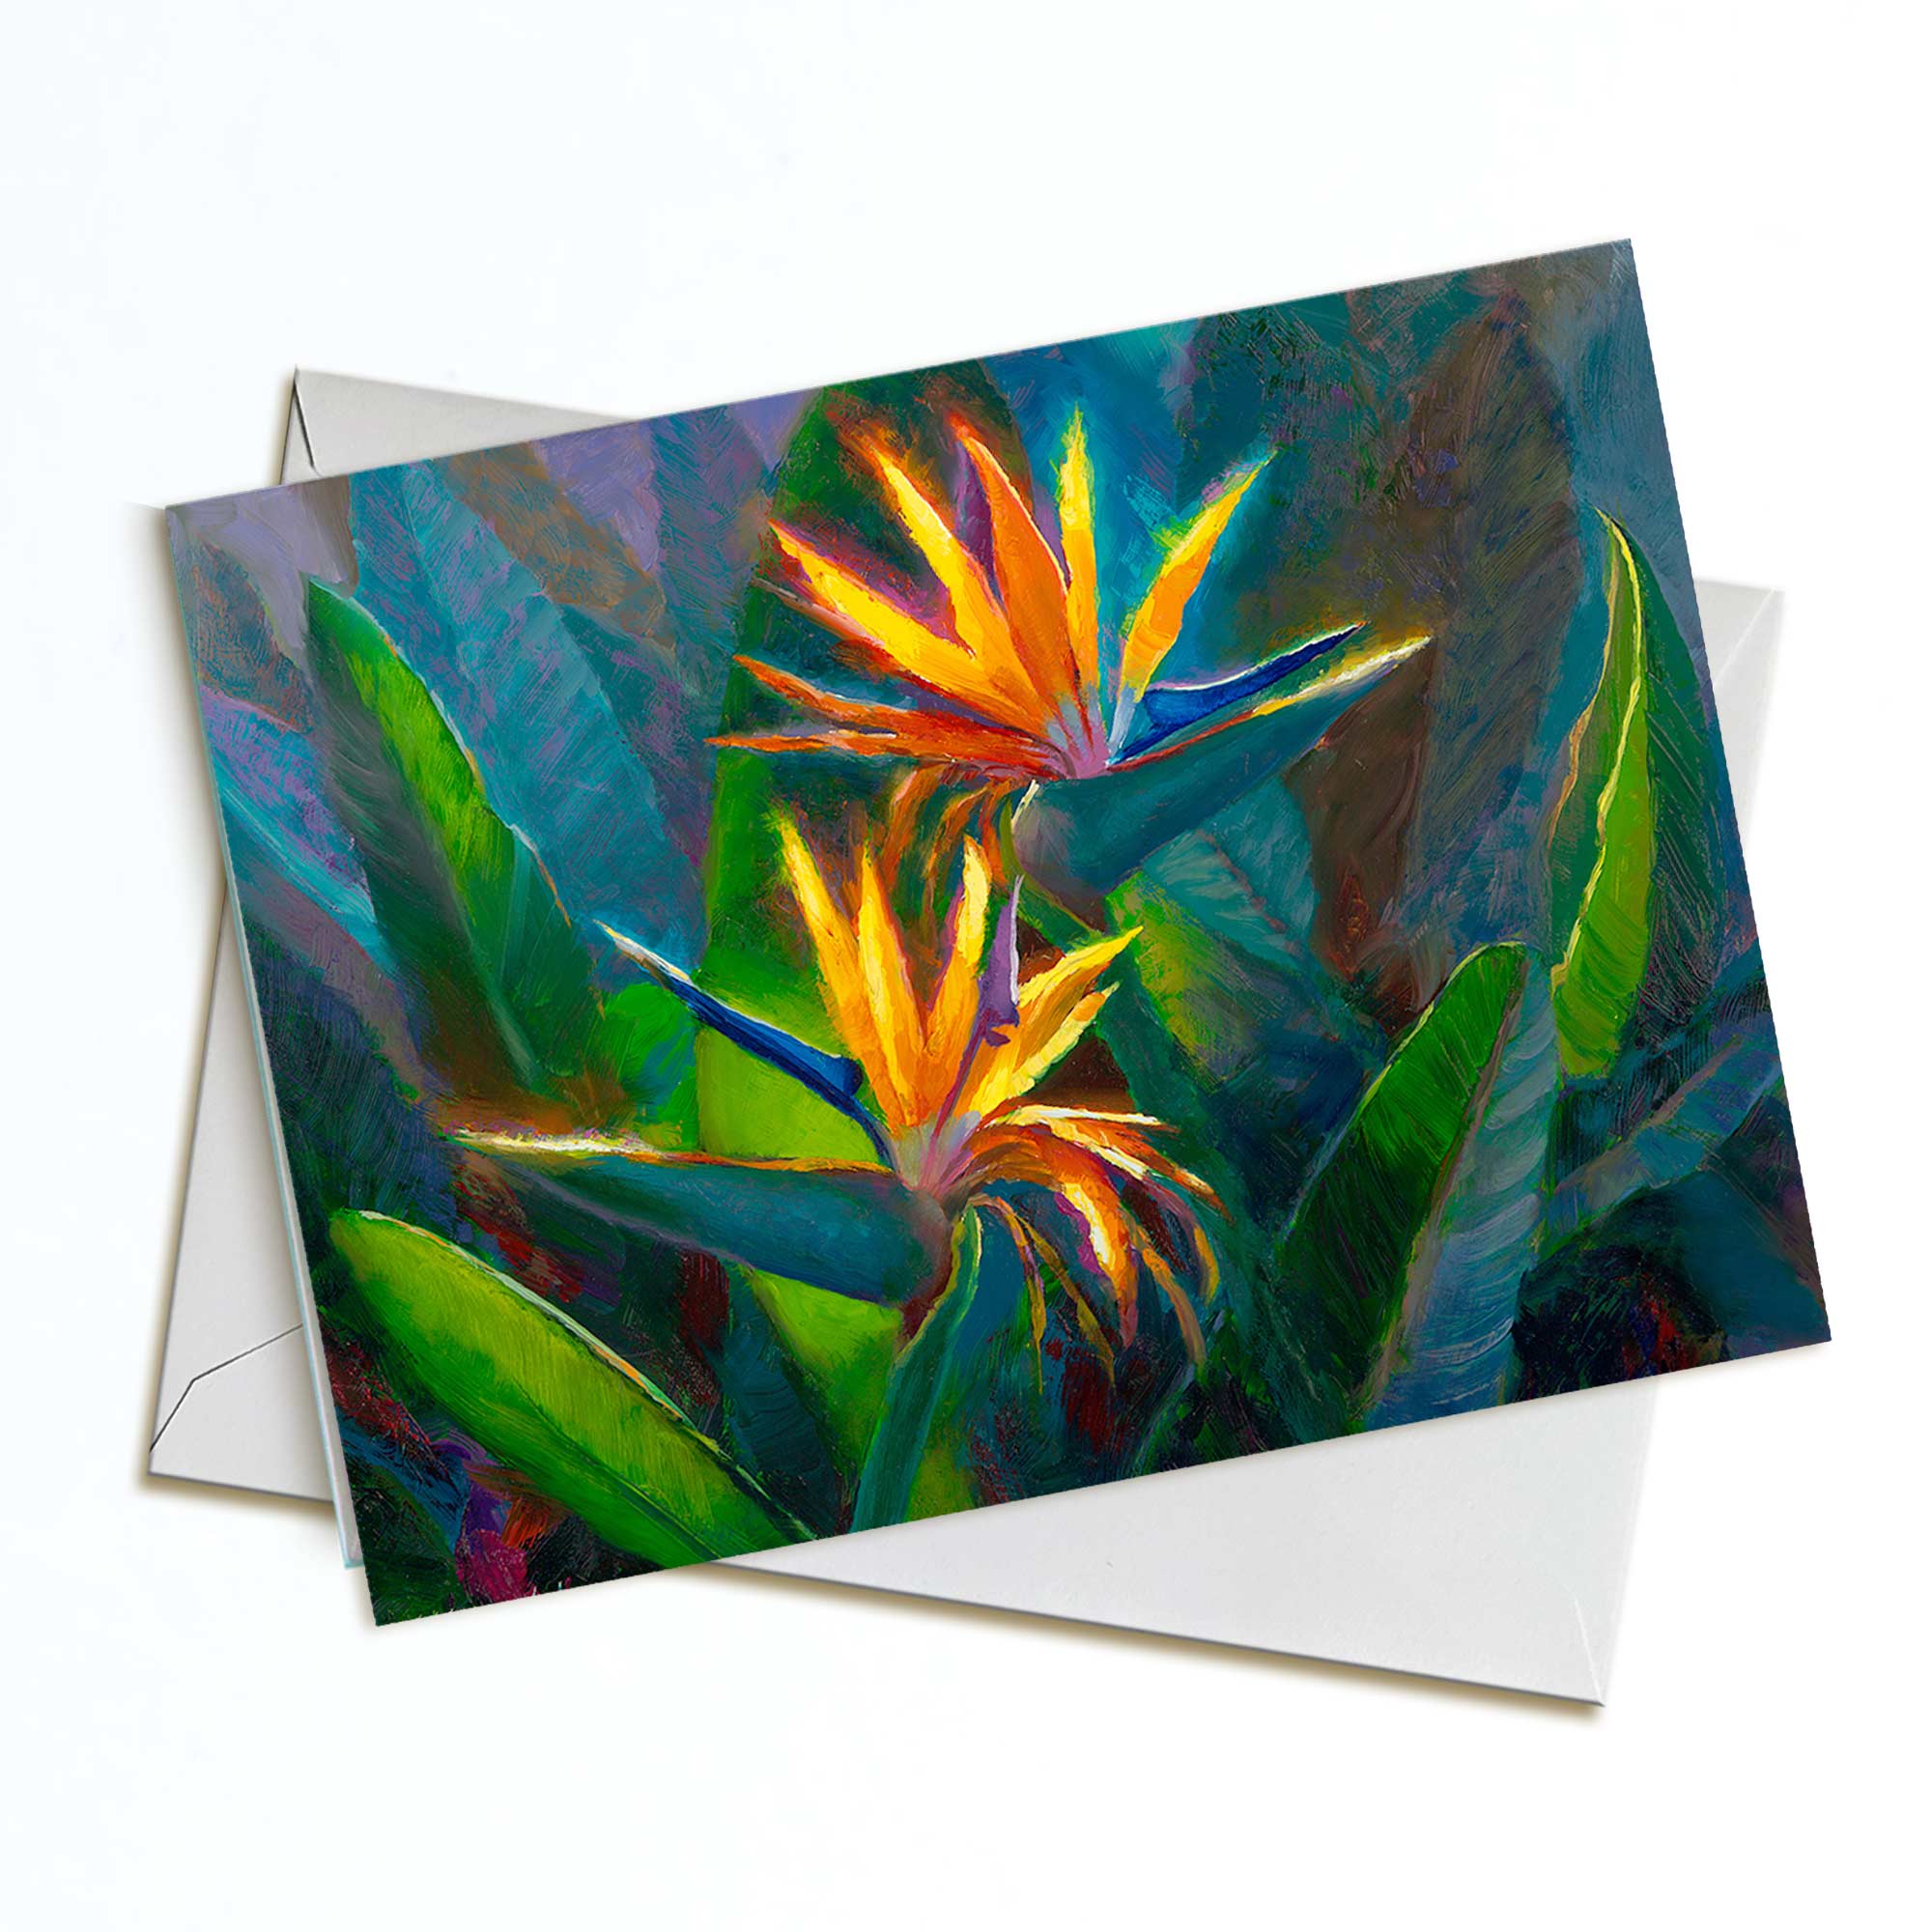 Bird of paradise flowers on a greeting card with white envelope